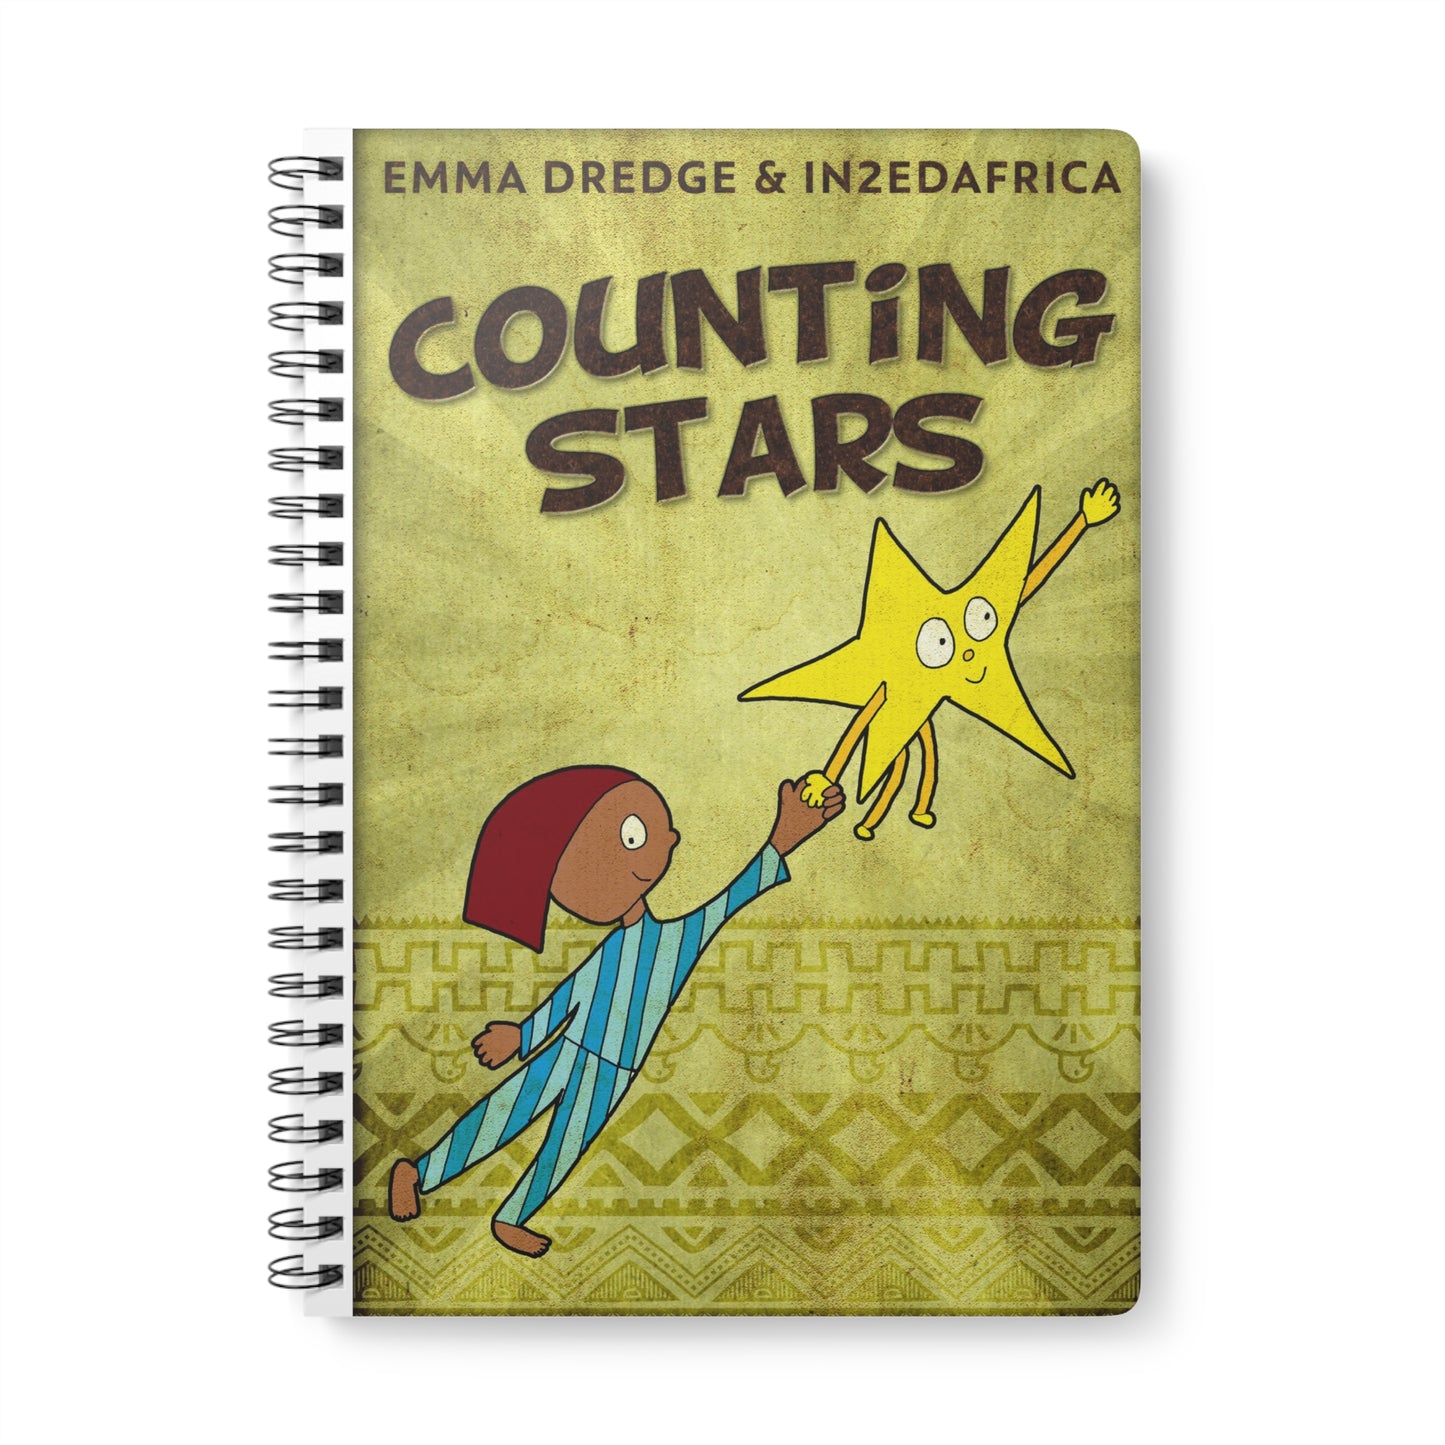 Counting Stars - A5 Wirebound Notebook